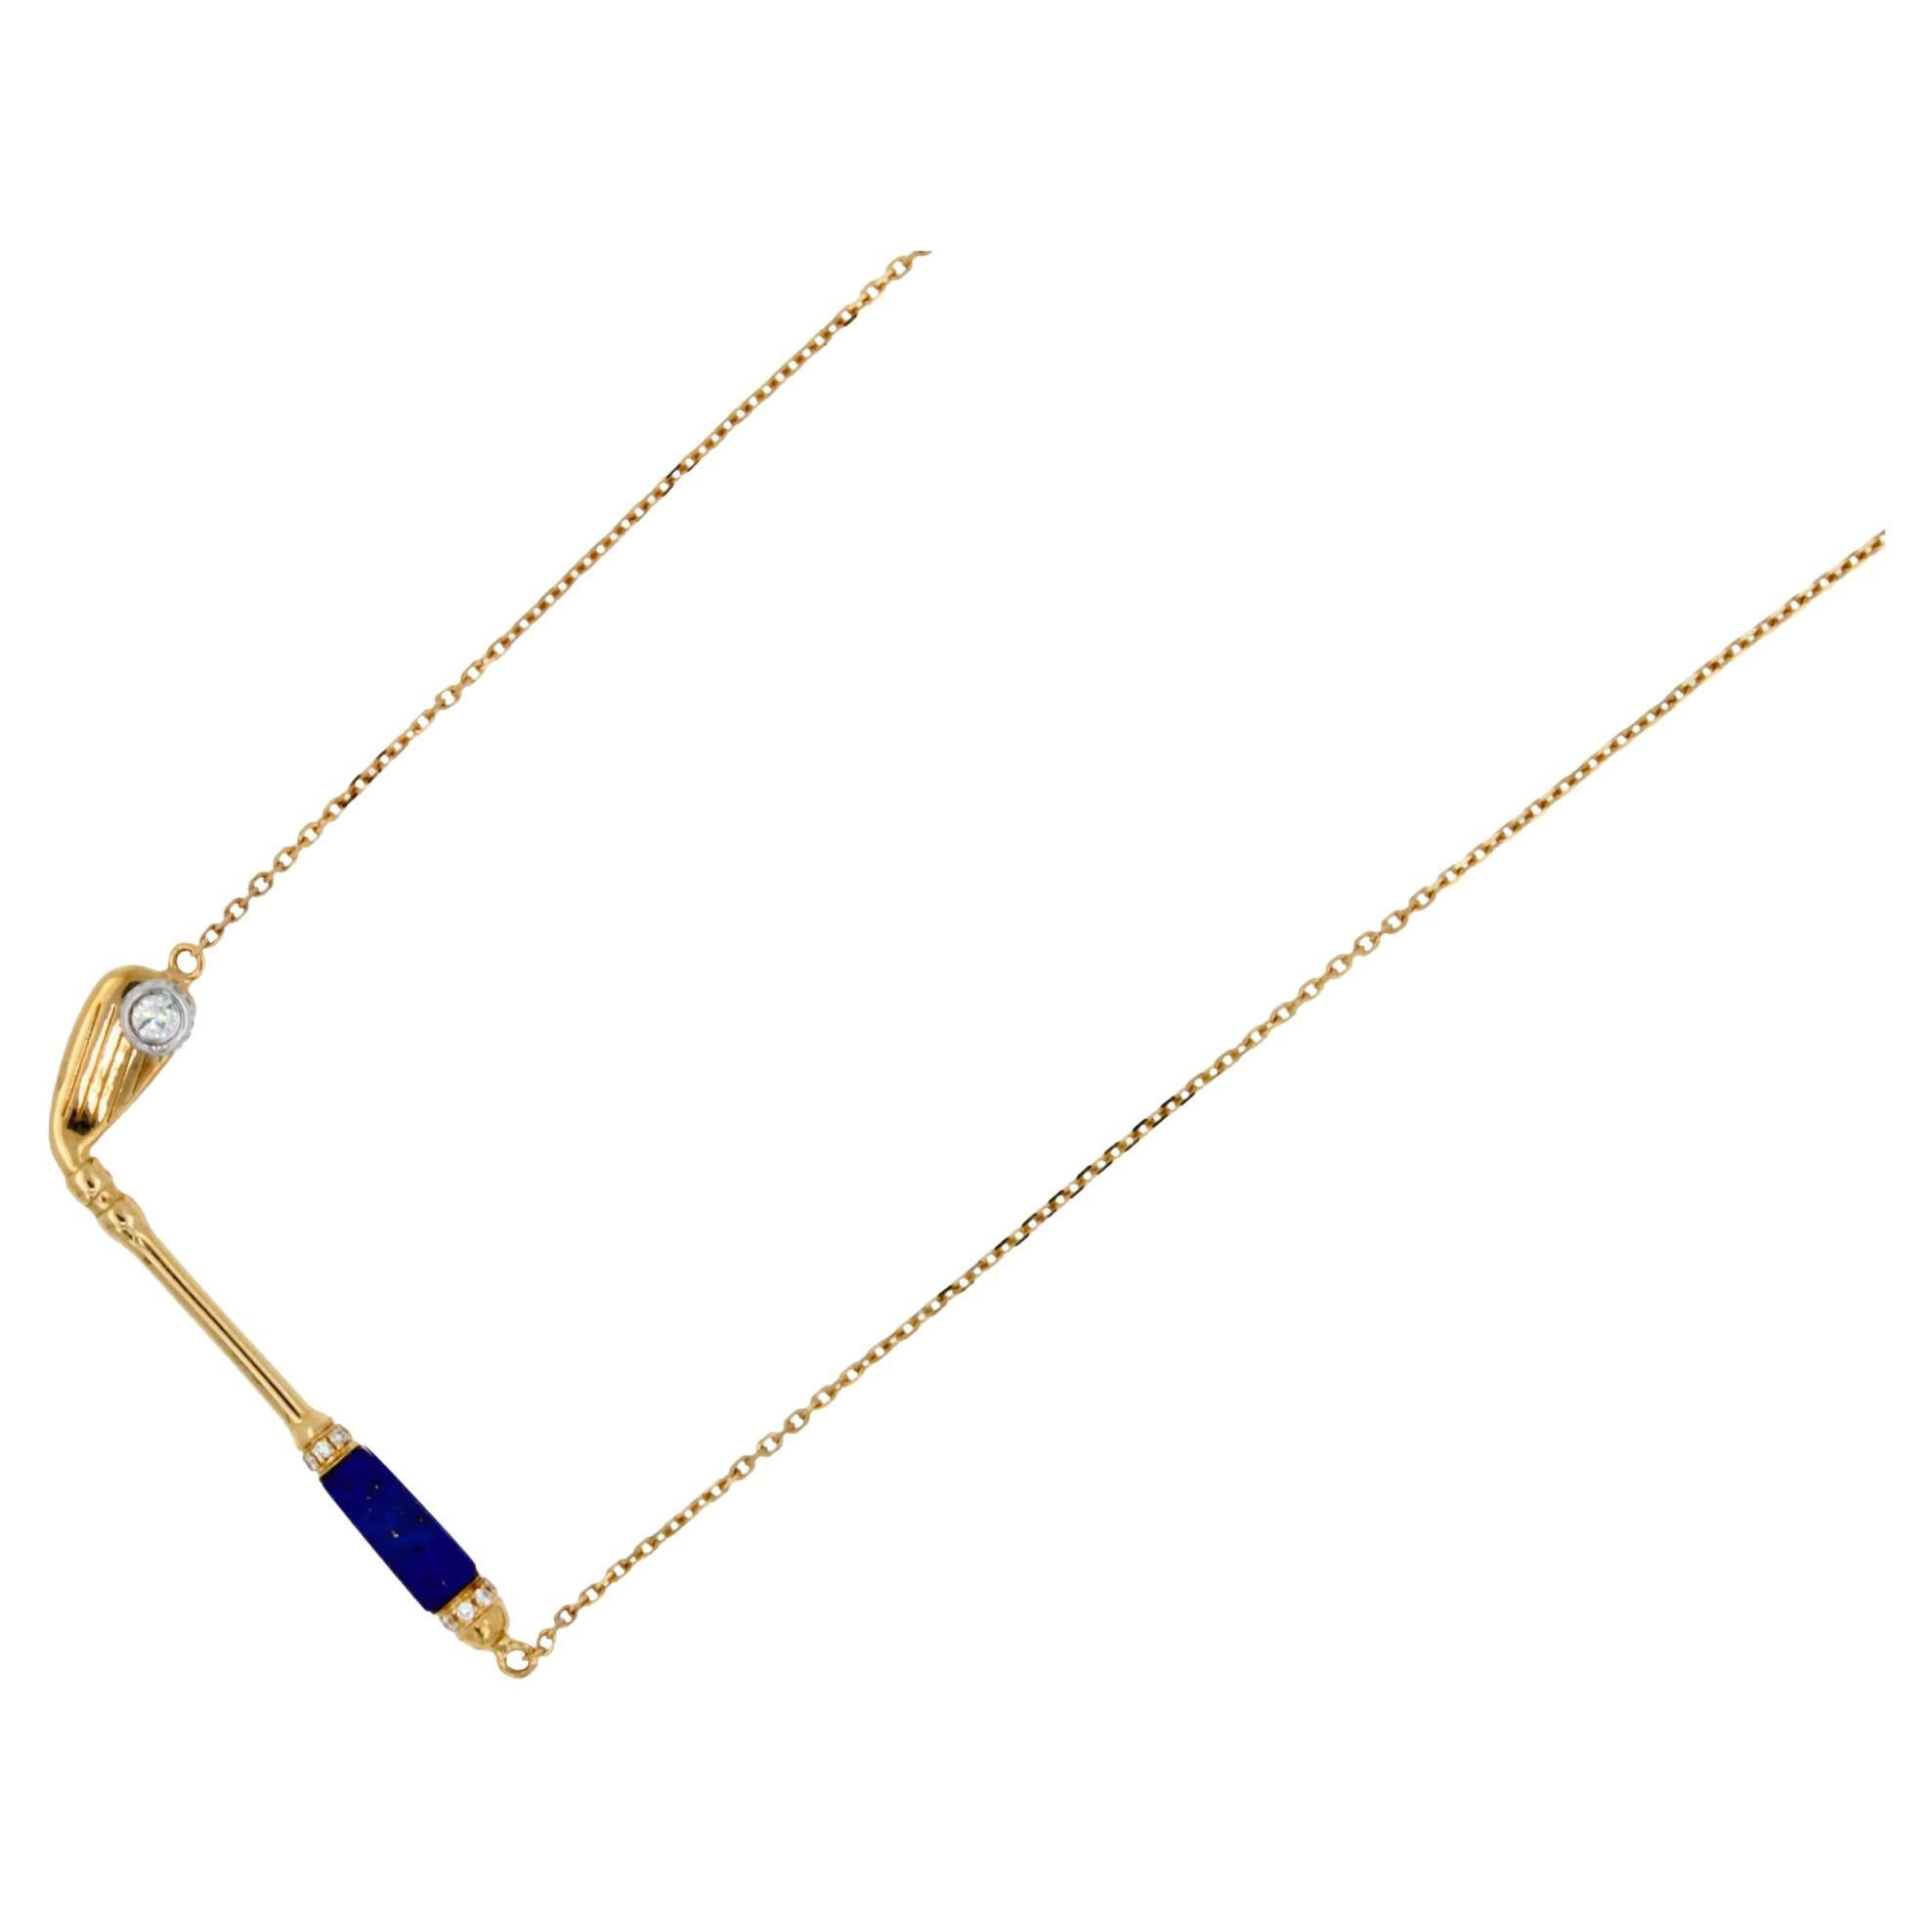 18K Yellow Gold
Blue Lapis Lazuli Gemstone Handle
White Diamond Golf Ball Gemstone
0.25 cts Diamonds
16-18 inches Diamond-Cut Link Cable chain length
In-Stock
This is part of Galt & Bro. Jewelry's exclusive, custom made-to-order Golf Club Birdies